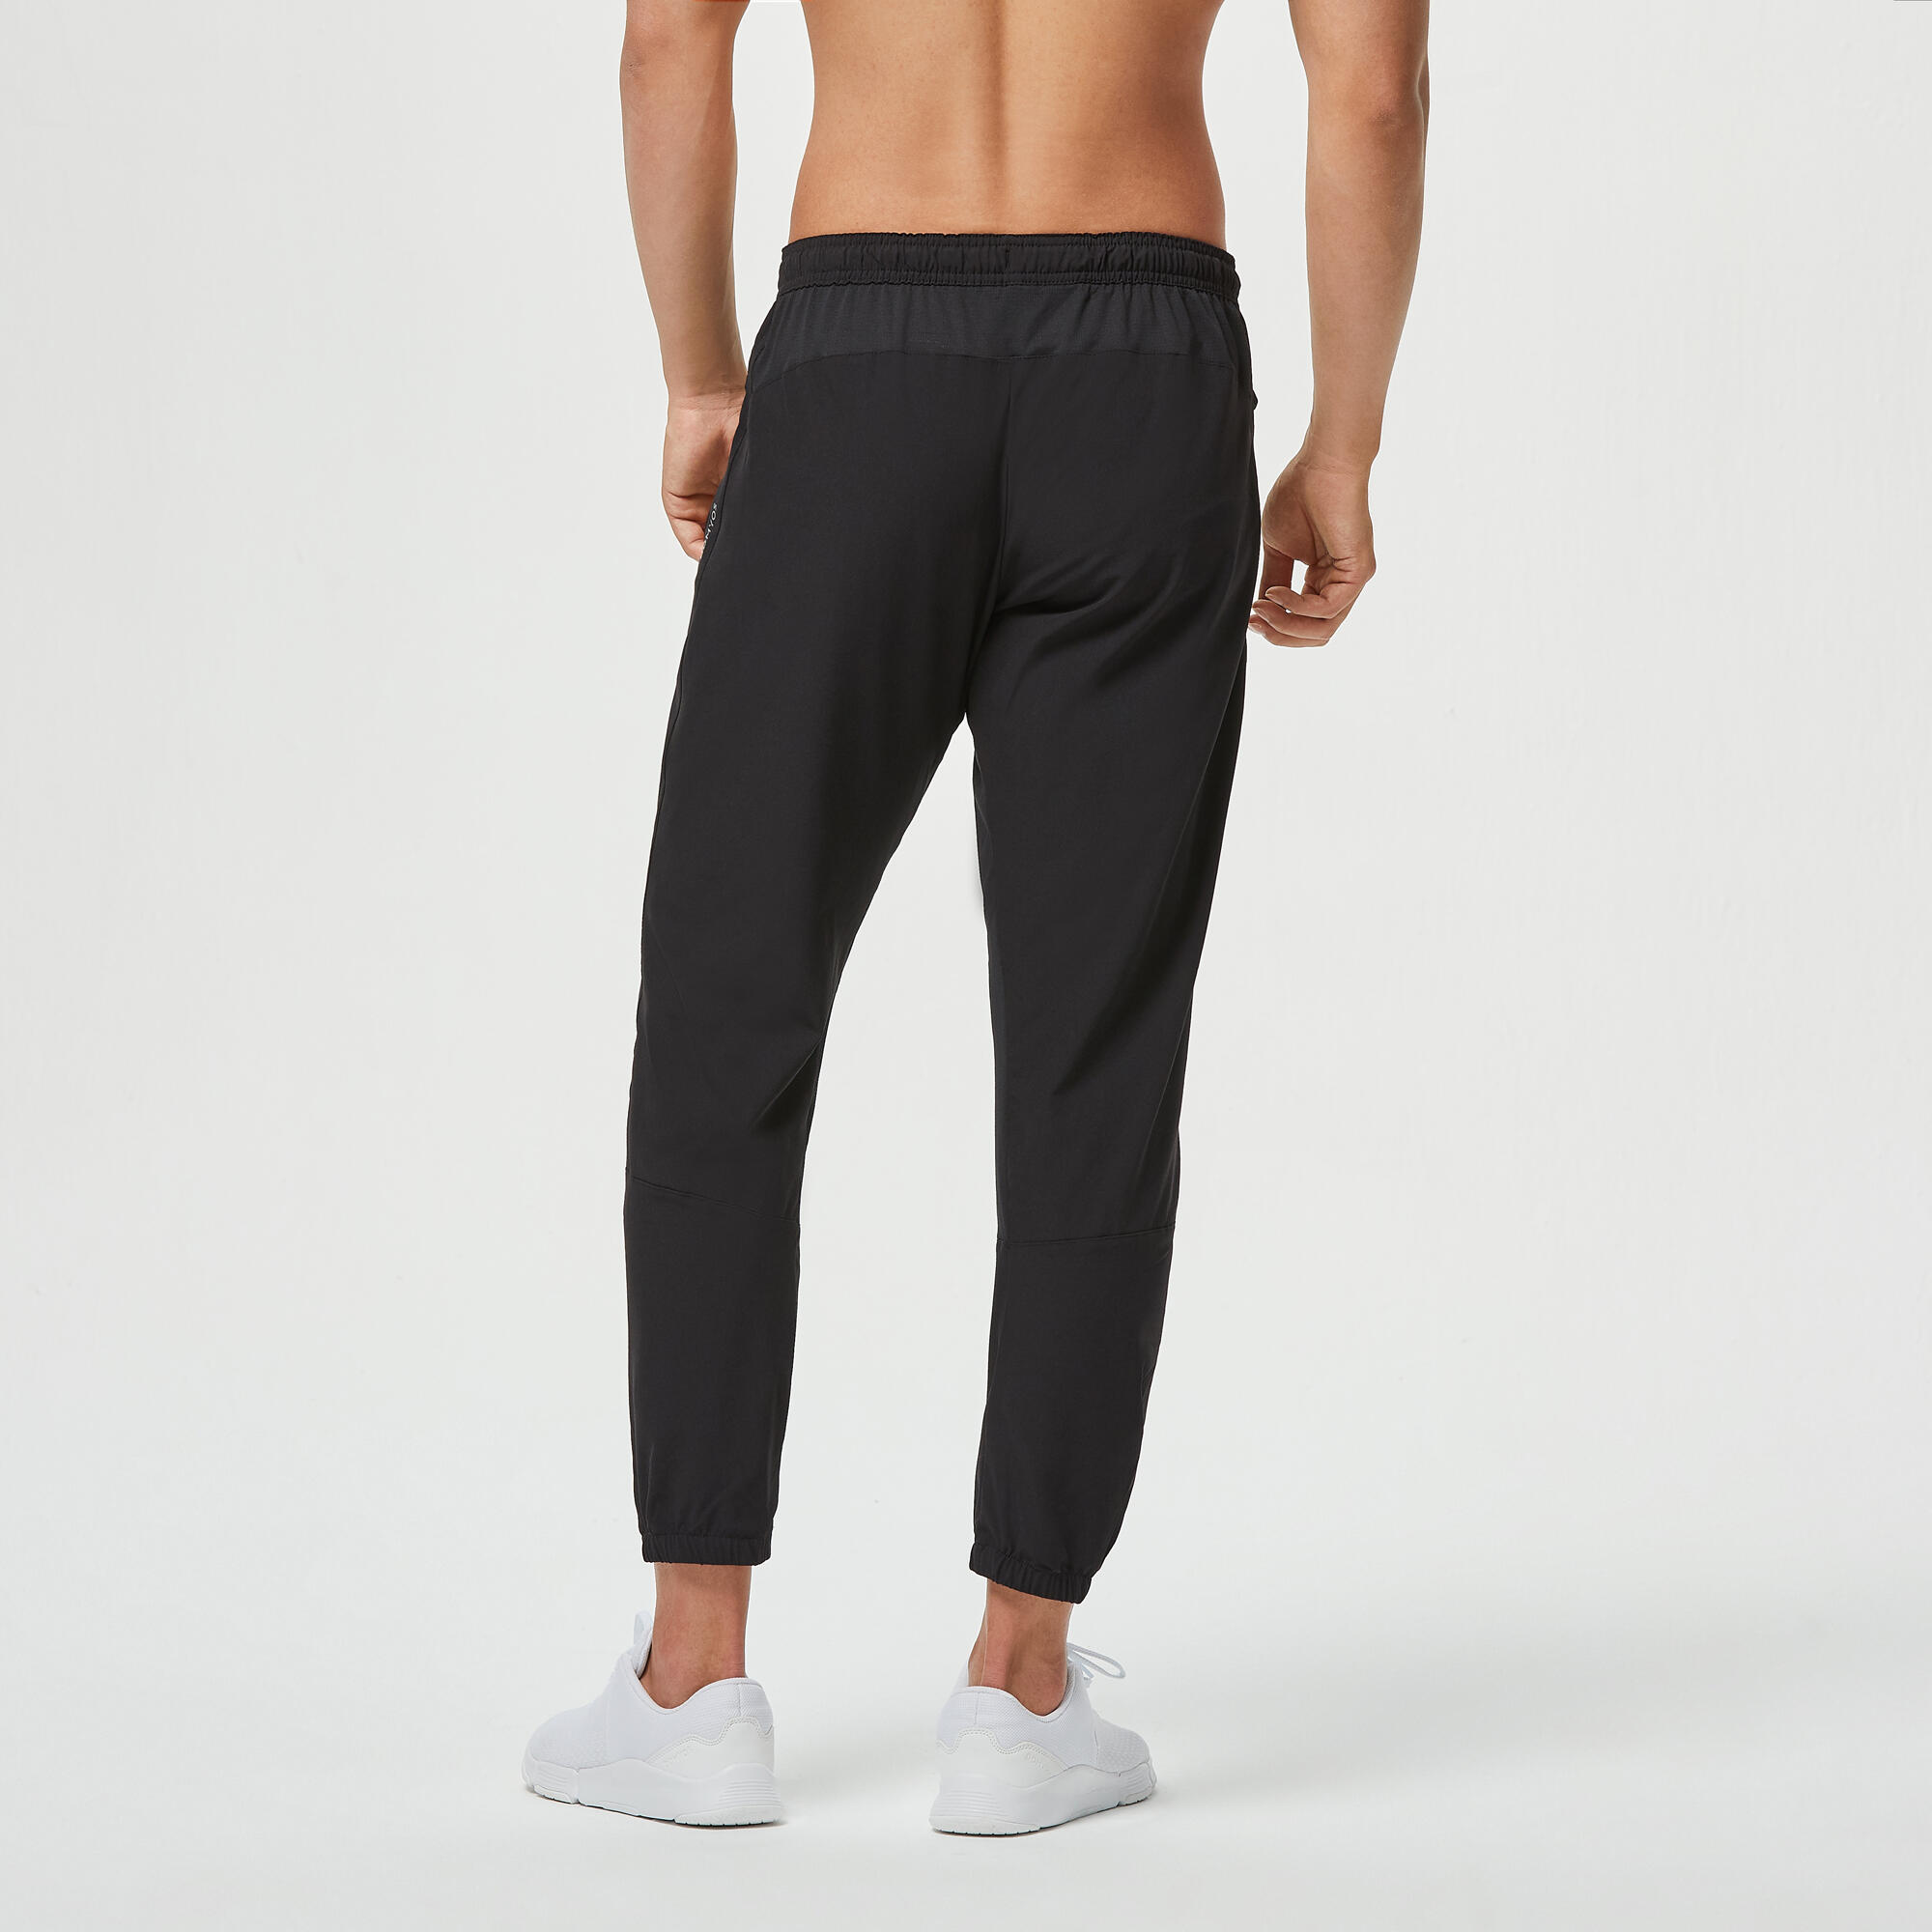 Domyos by Decathlon Men Solid Grey Quick Dry Training Track Pants :  Amazon.in: Clothing & Accessories